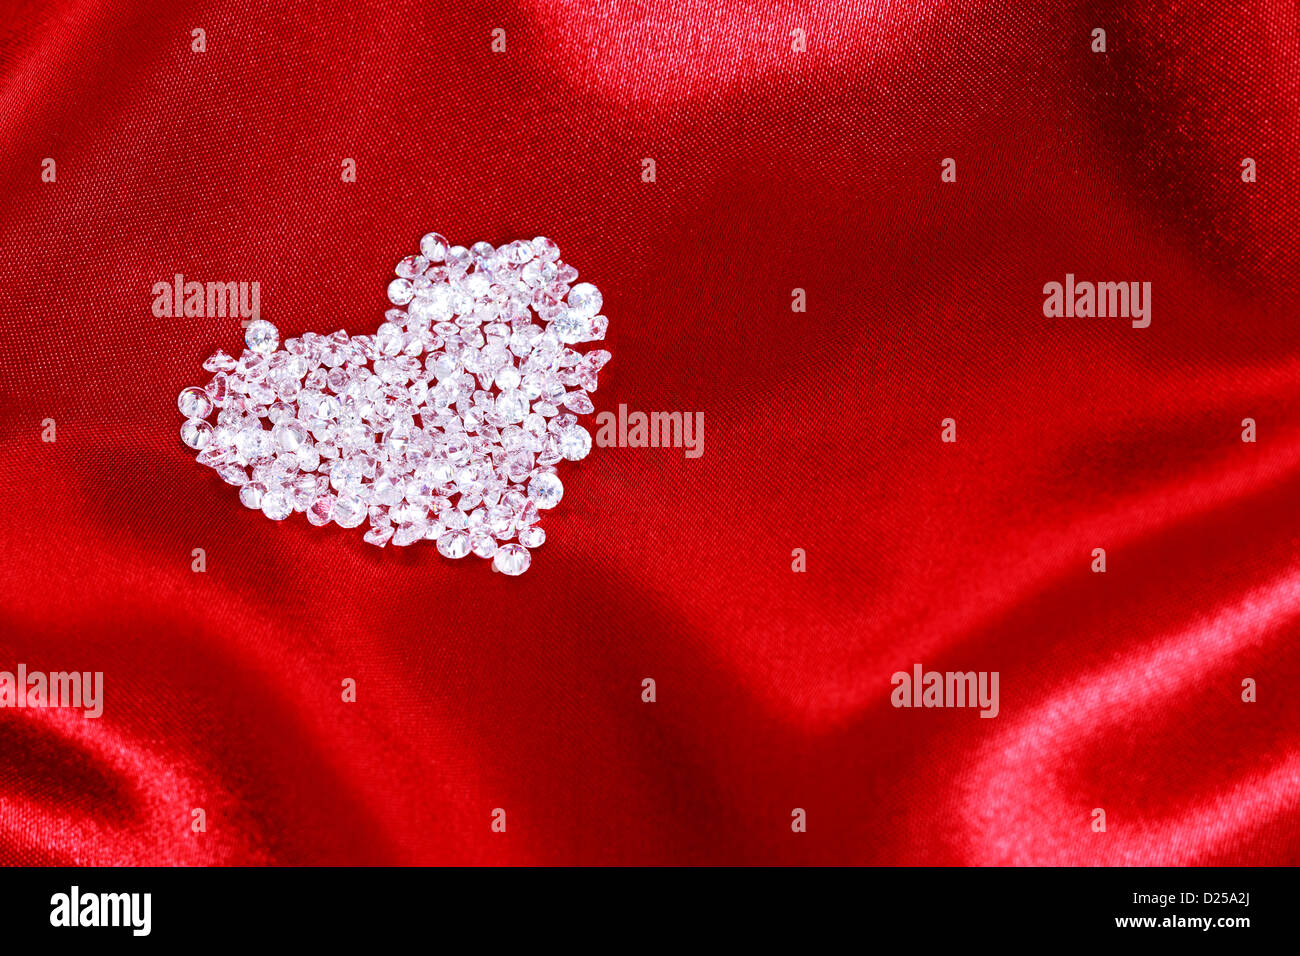 Heart shape made from CZ diamonds on a red satin background. Stock Photo